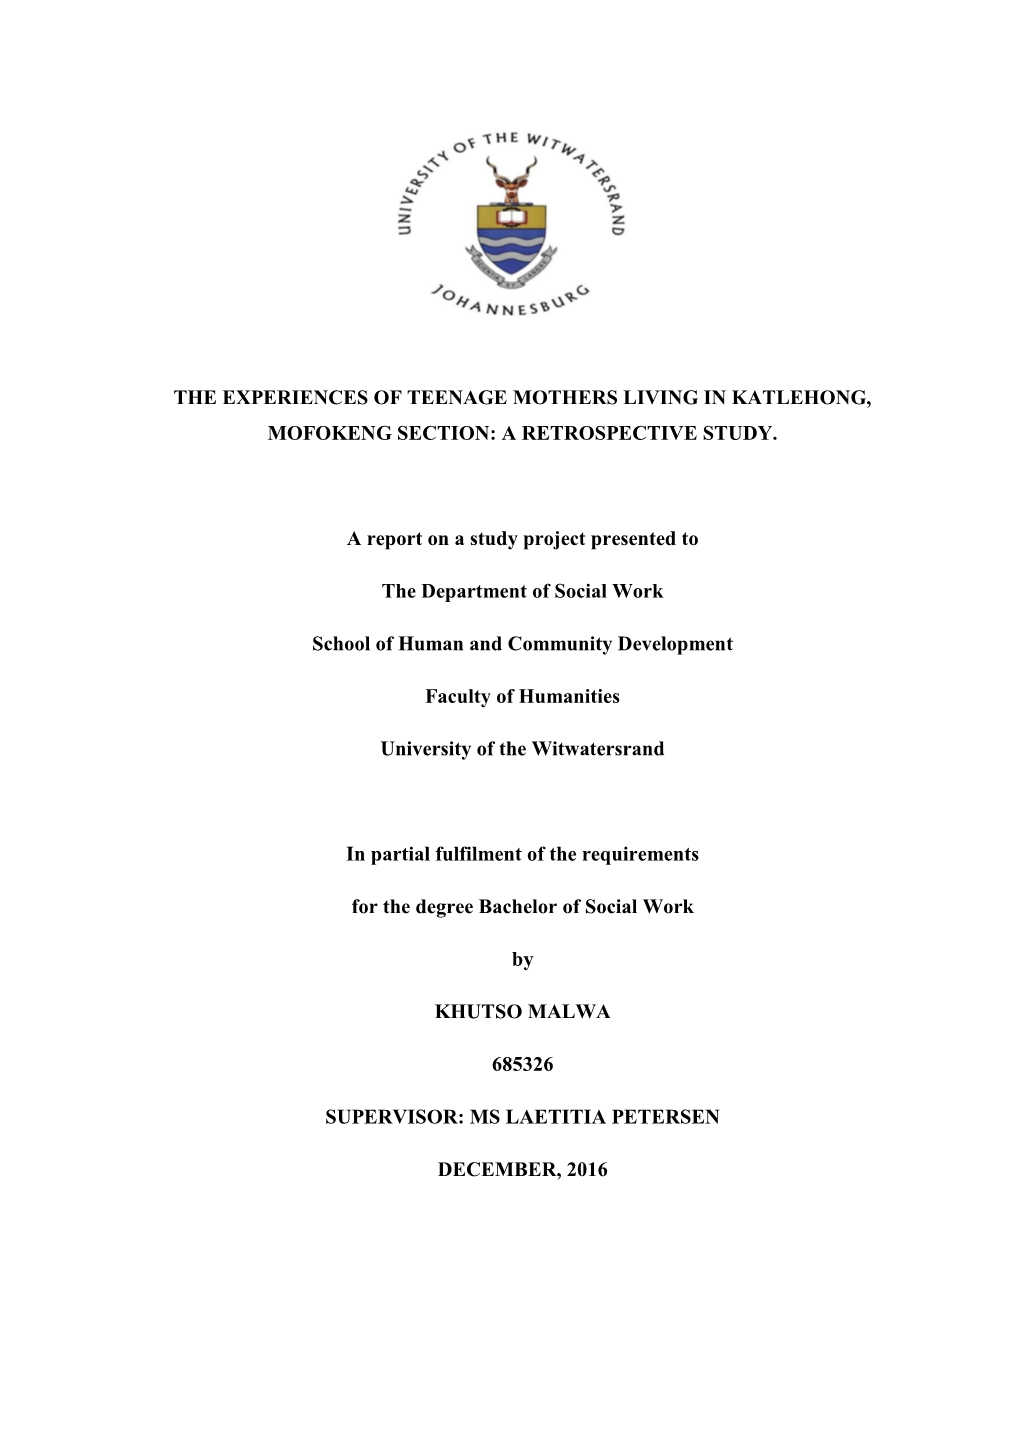 THE EXPERIENCES of TEENAGE MOTHERS LIVING in KATLEHONG, MOFOKENG SECTION: a RETROSPECTIVE STUDY. a Report on a Study Project